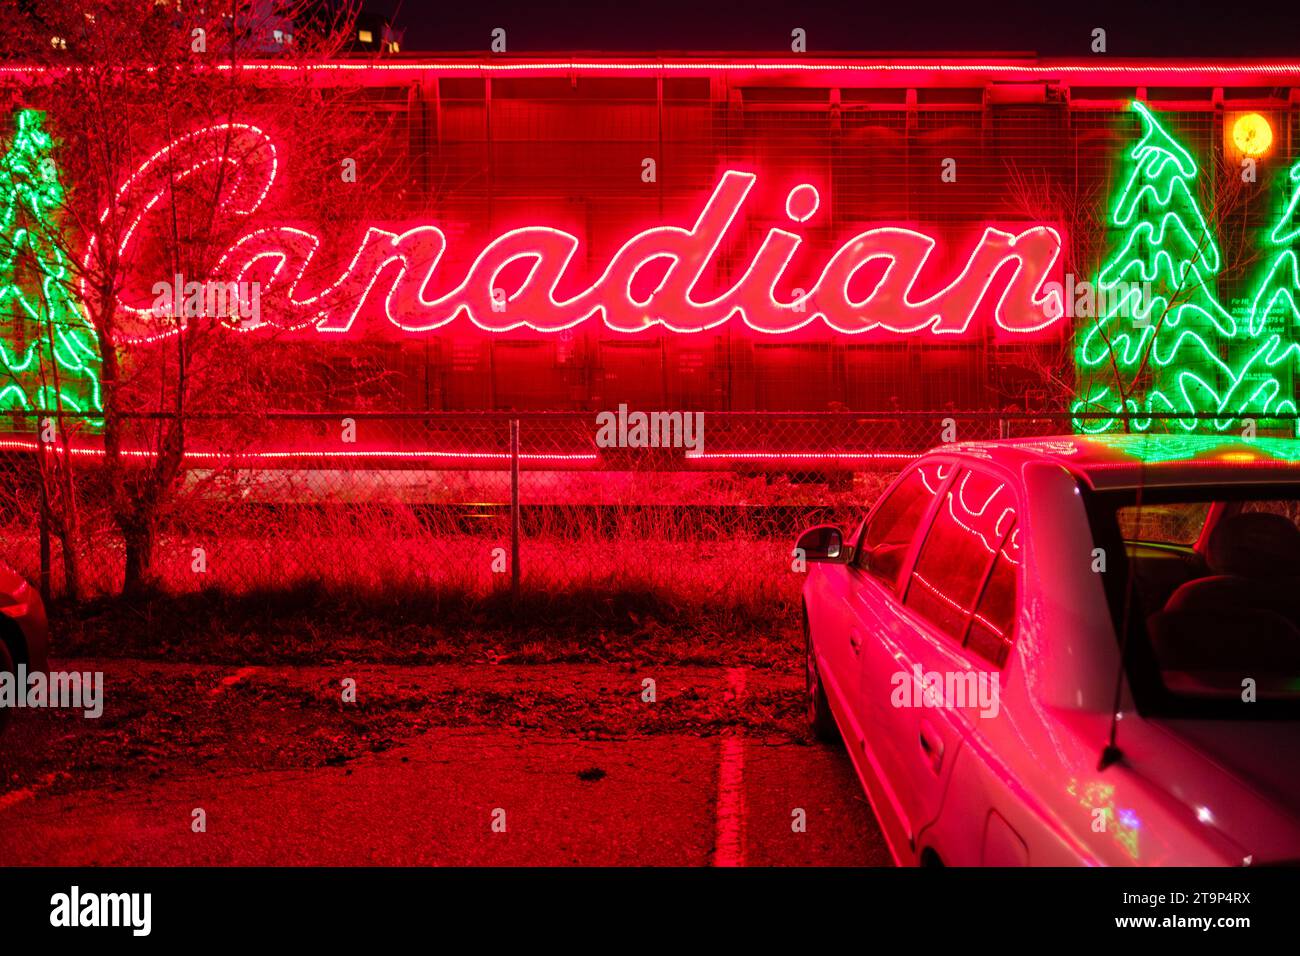 The CPKC, Canadian Pacific Holiday Train with Christmas decorations, Christmas lights in London, Ontario, Canada Stock Photo